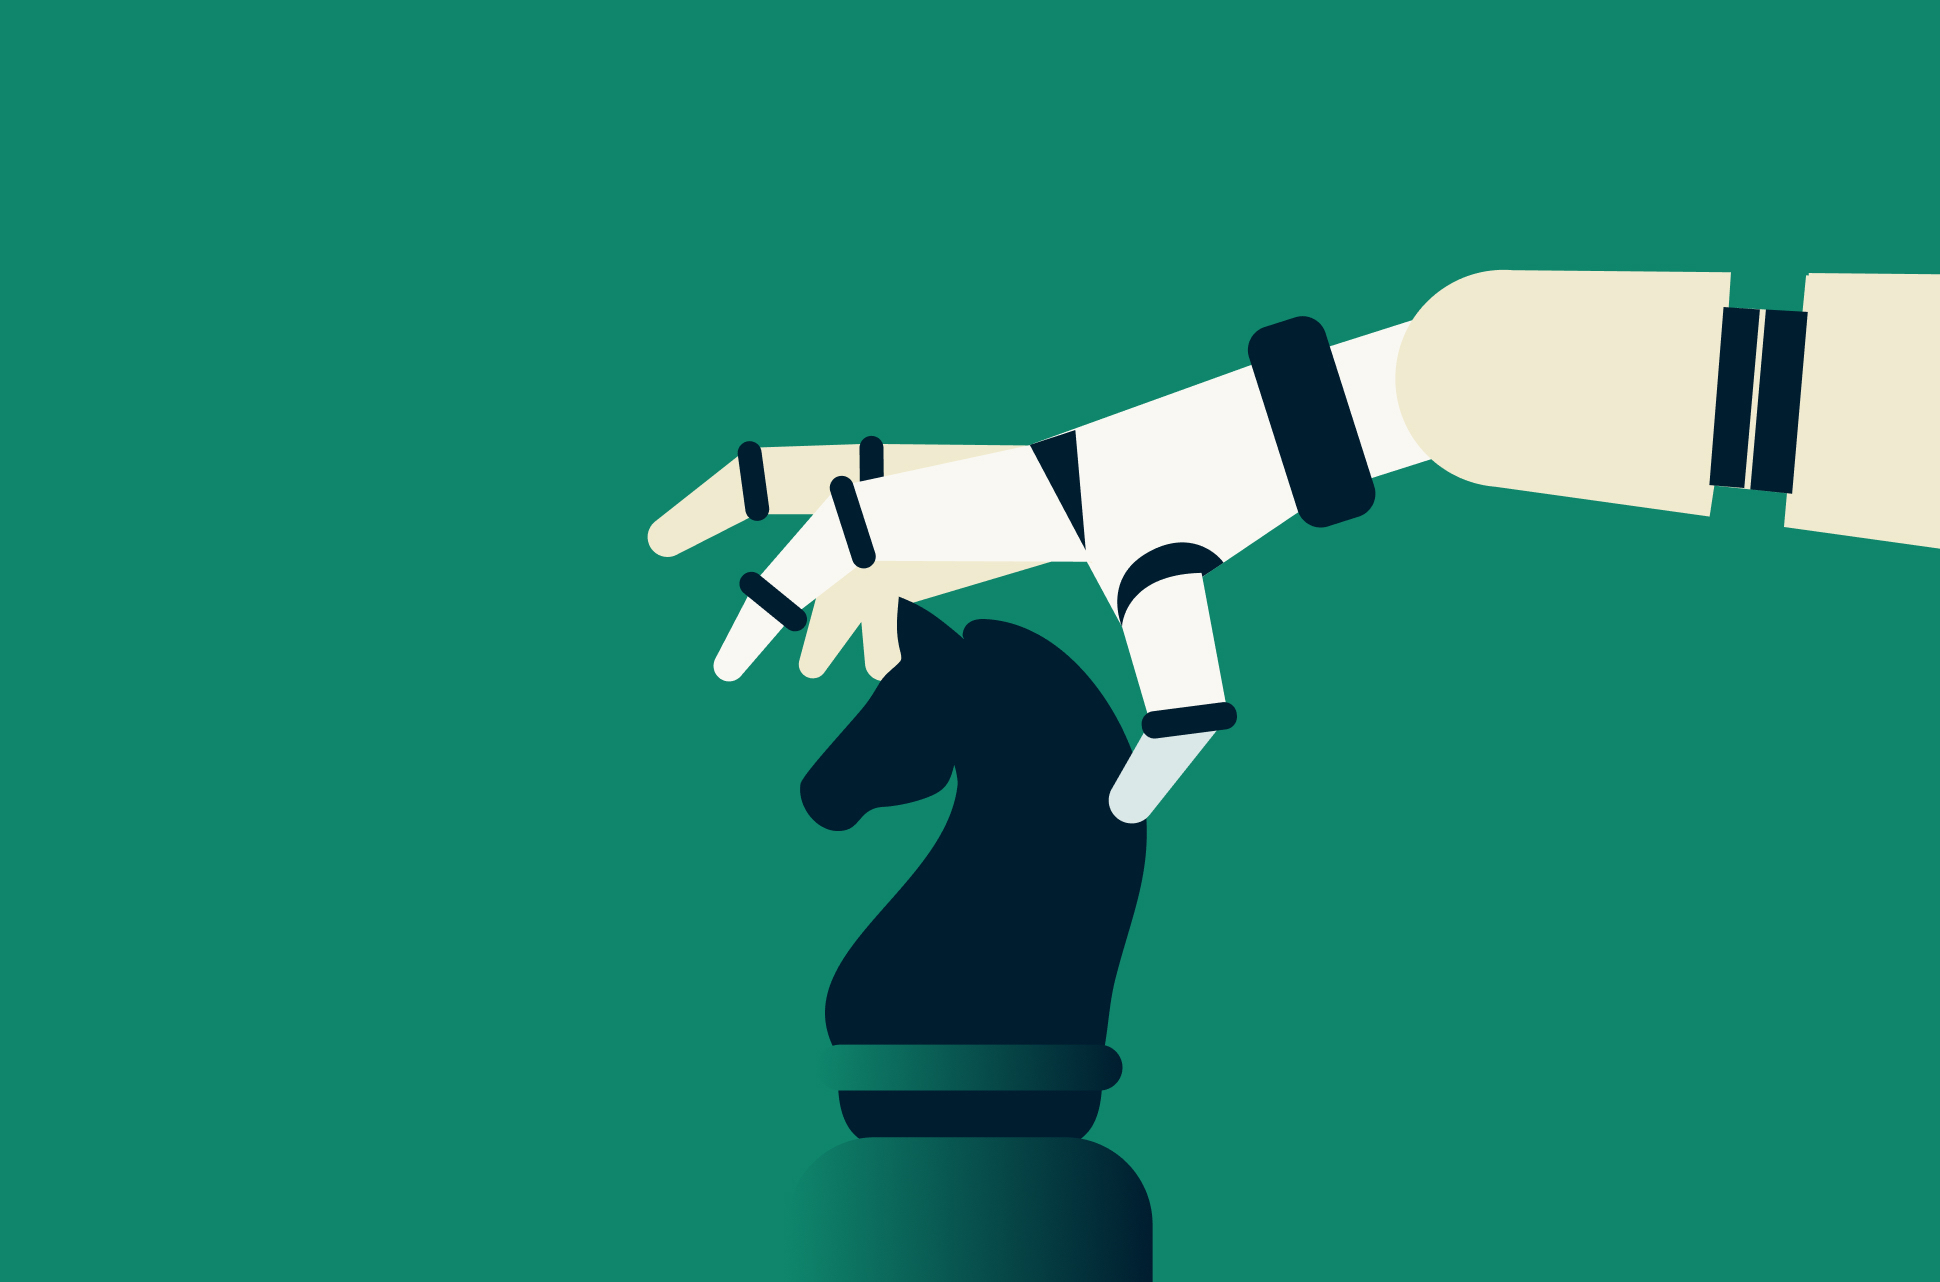 A robotic hand is poised to make a move on a chess knight piece against a green backdrop.